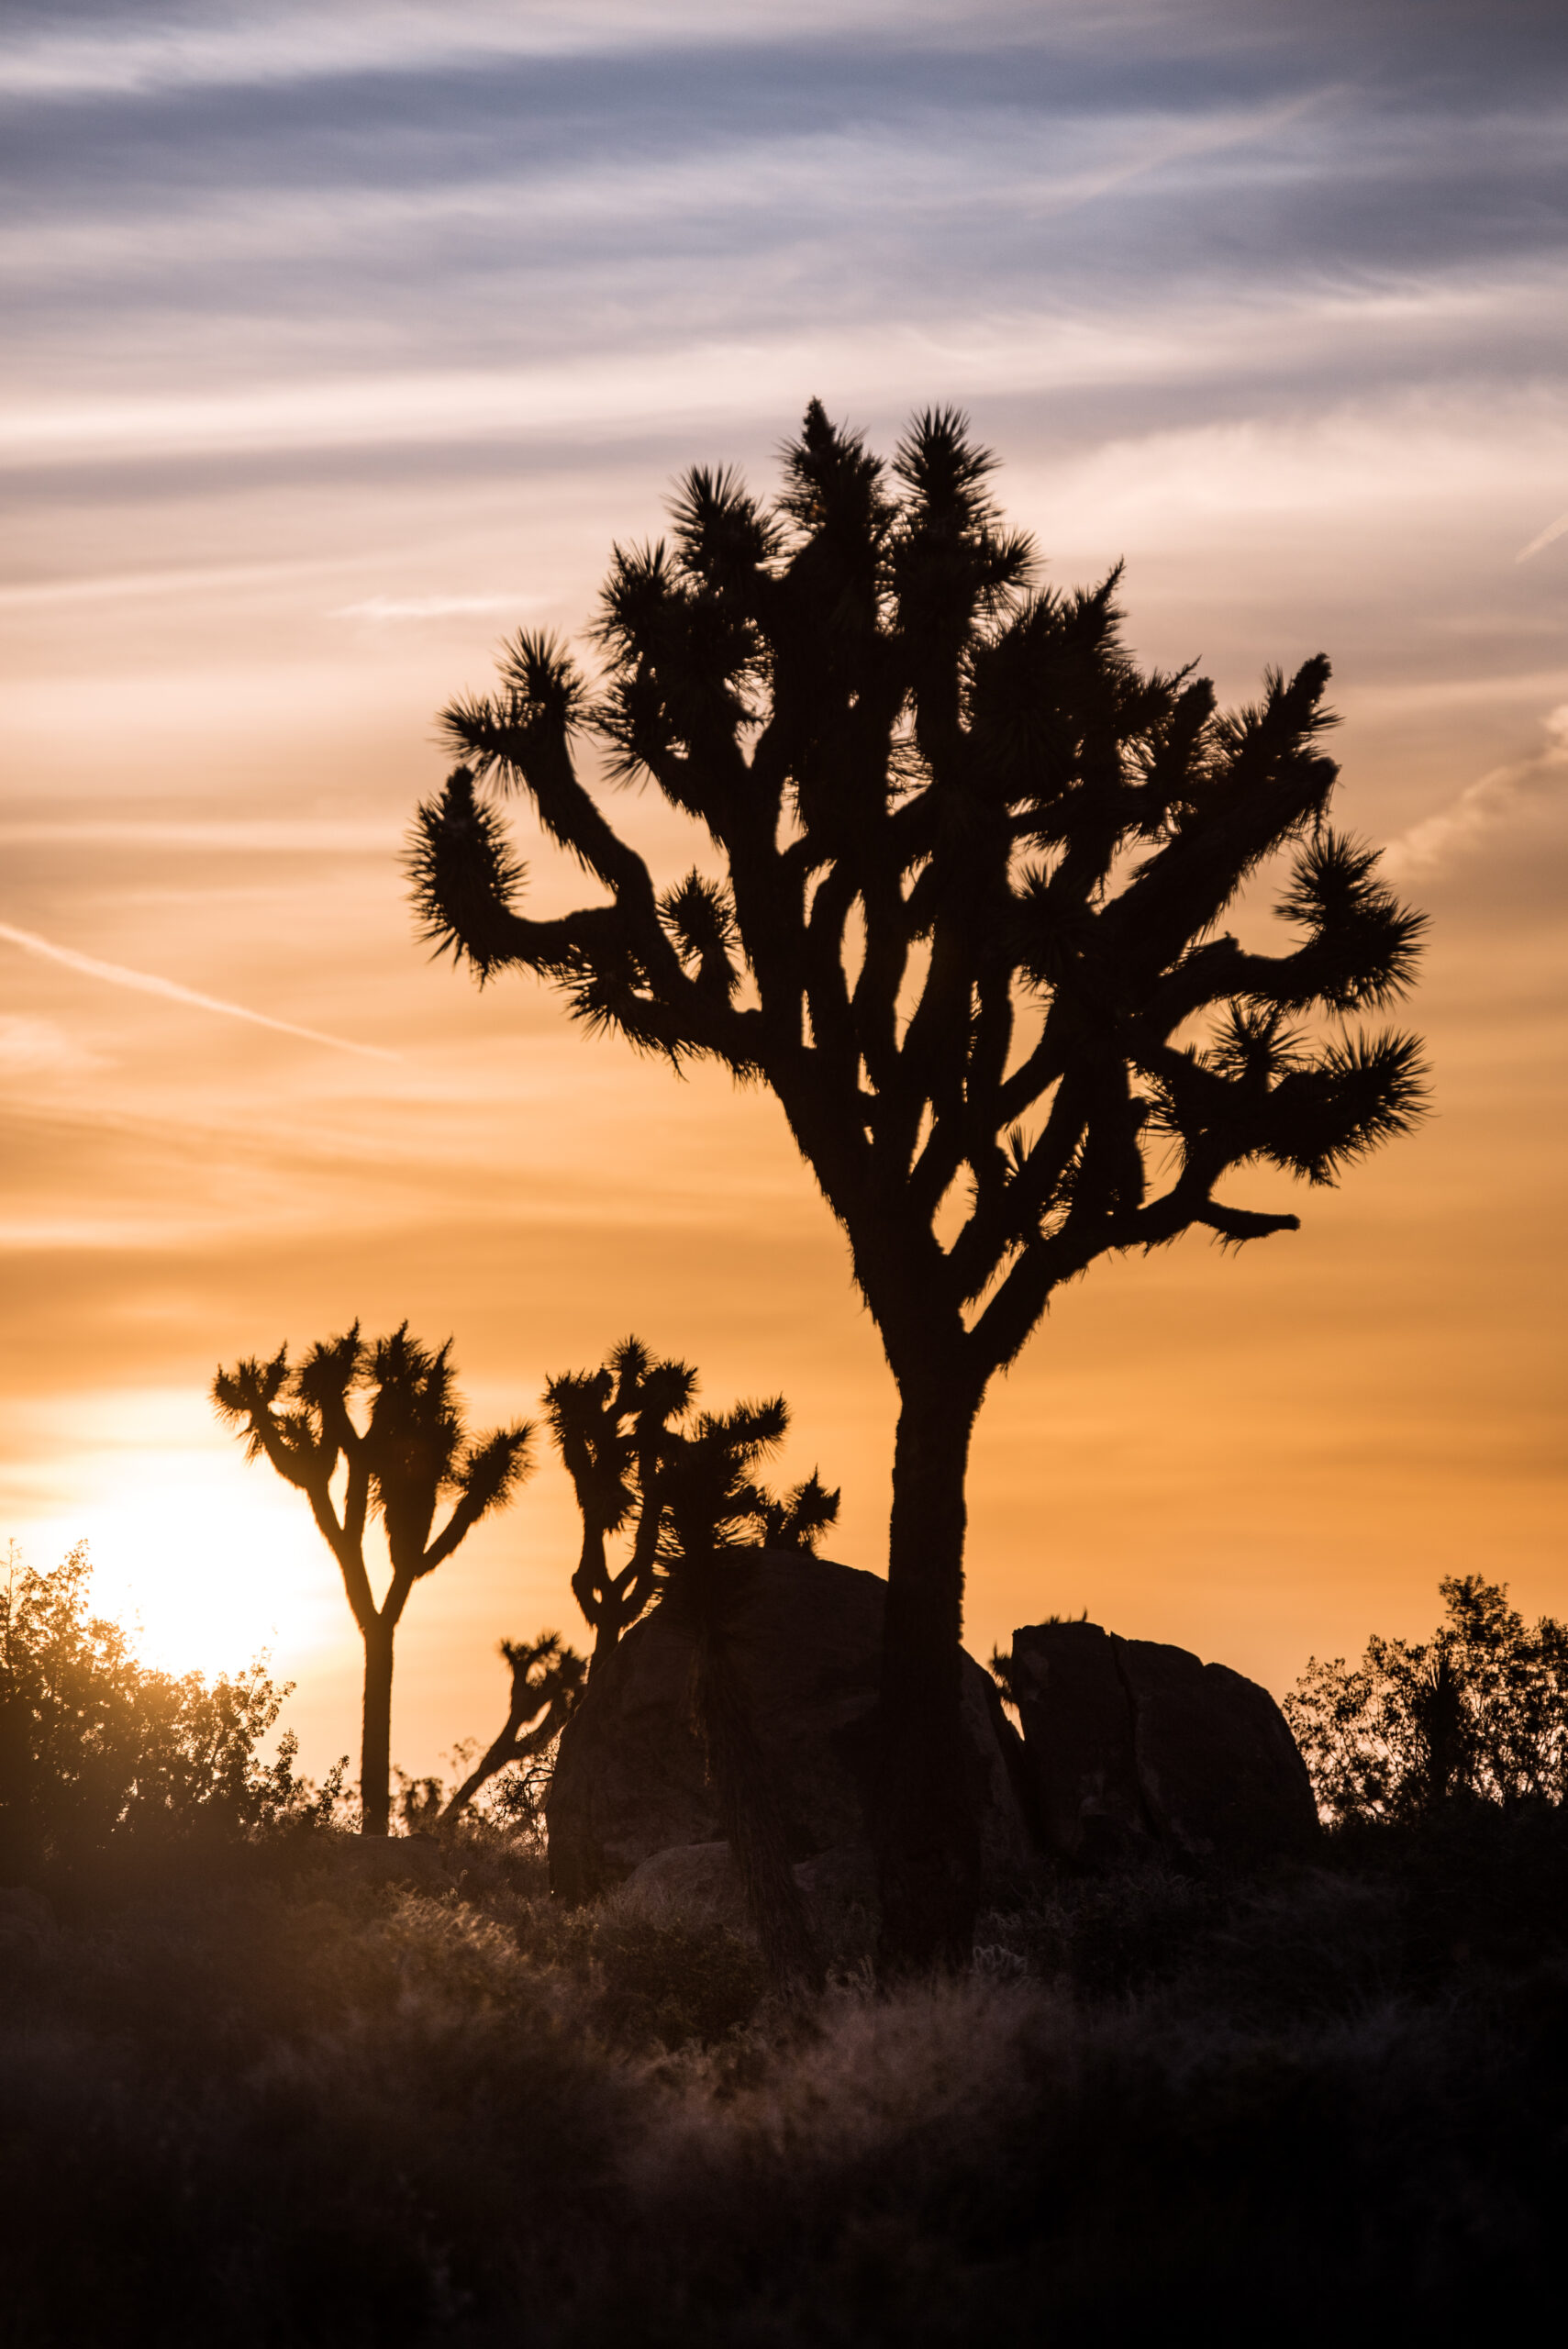 An orange and blue sunset with Joshua Tree's and bushes shadowed in the foreground.